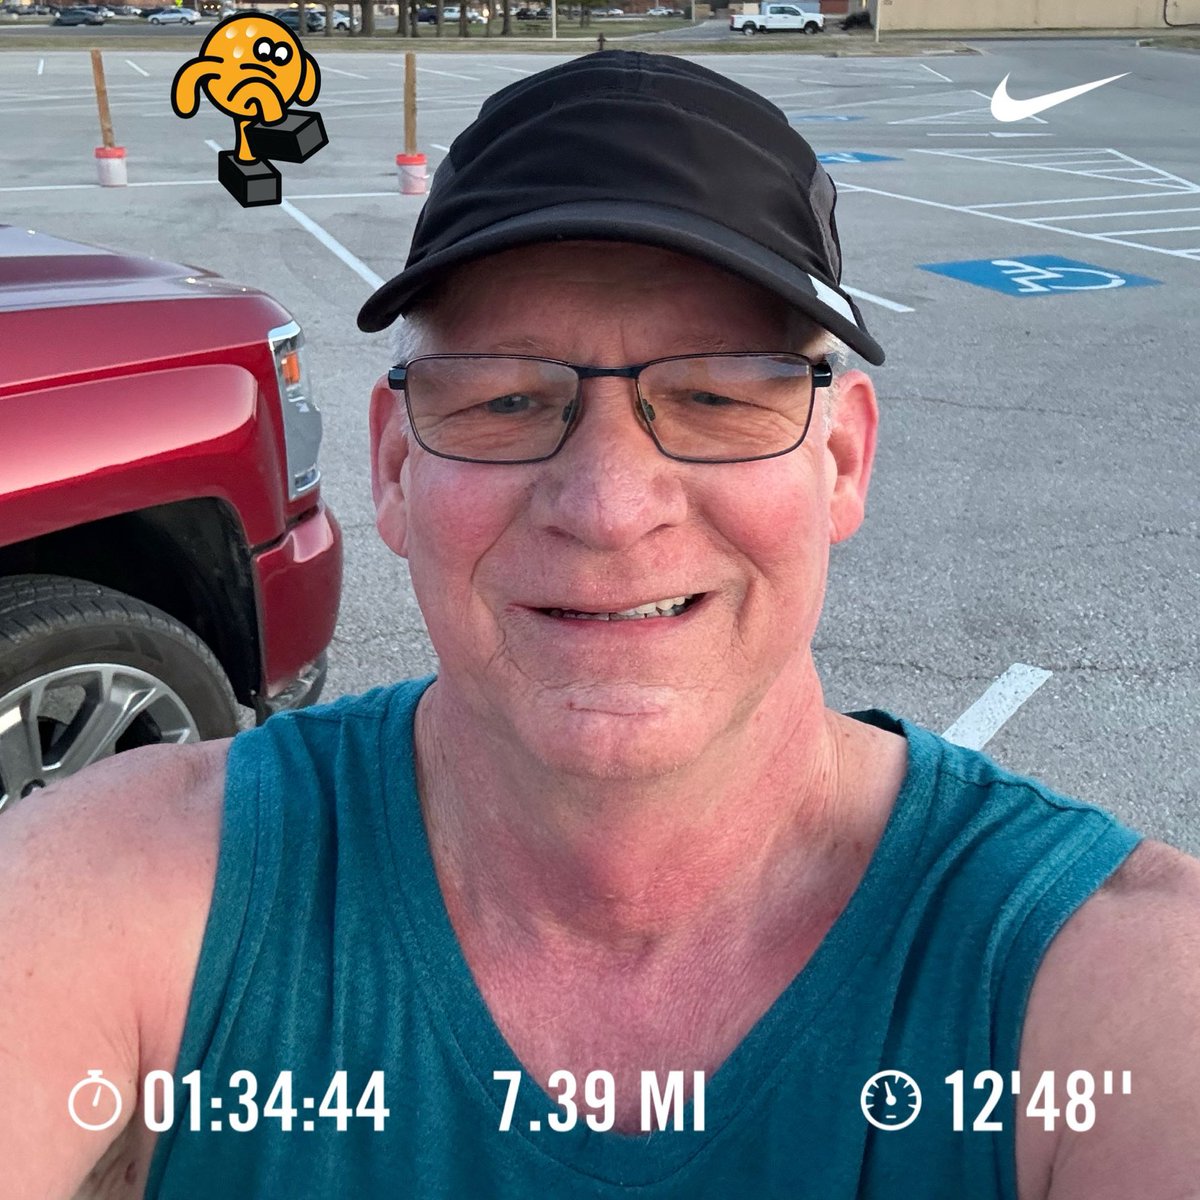 An okay run, not amazingly fast, had to work for this one. got lots more to do in the future.
#cantstopwontstoprunning
#pushingtheclockback
#foryoumom
#foryoudad